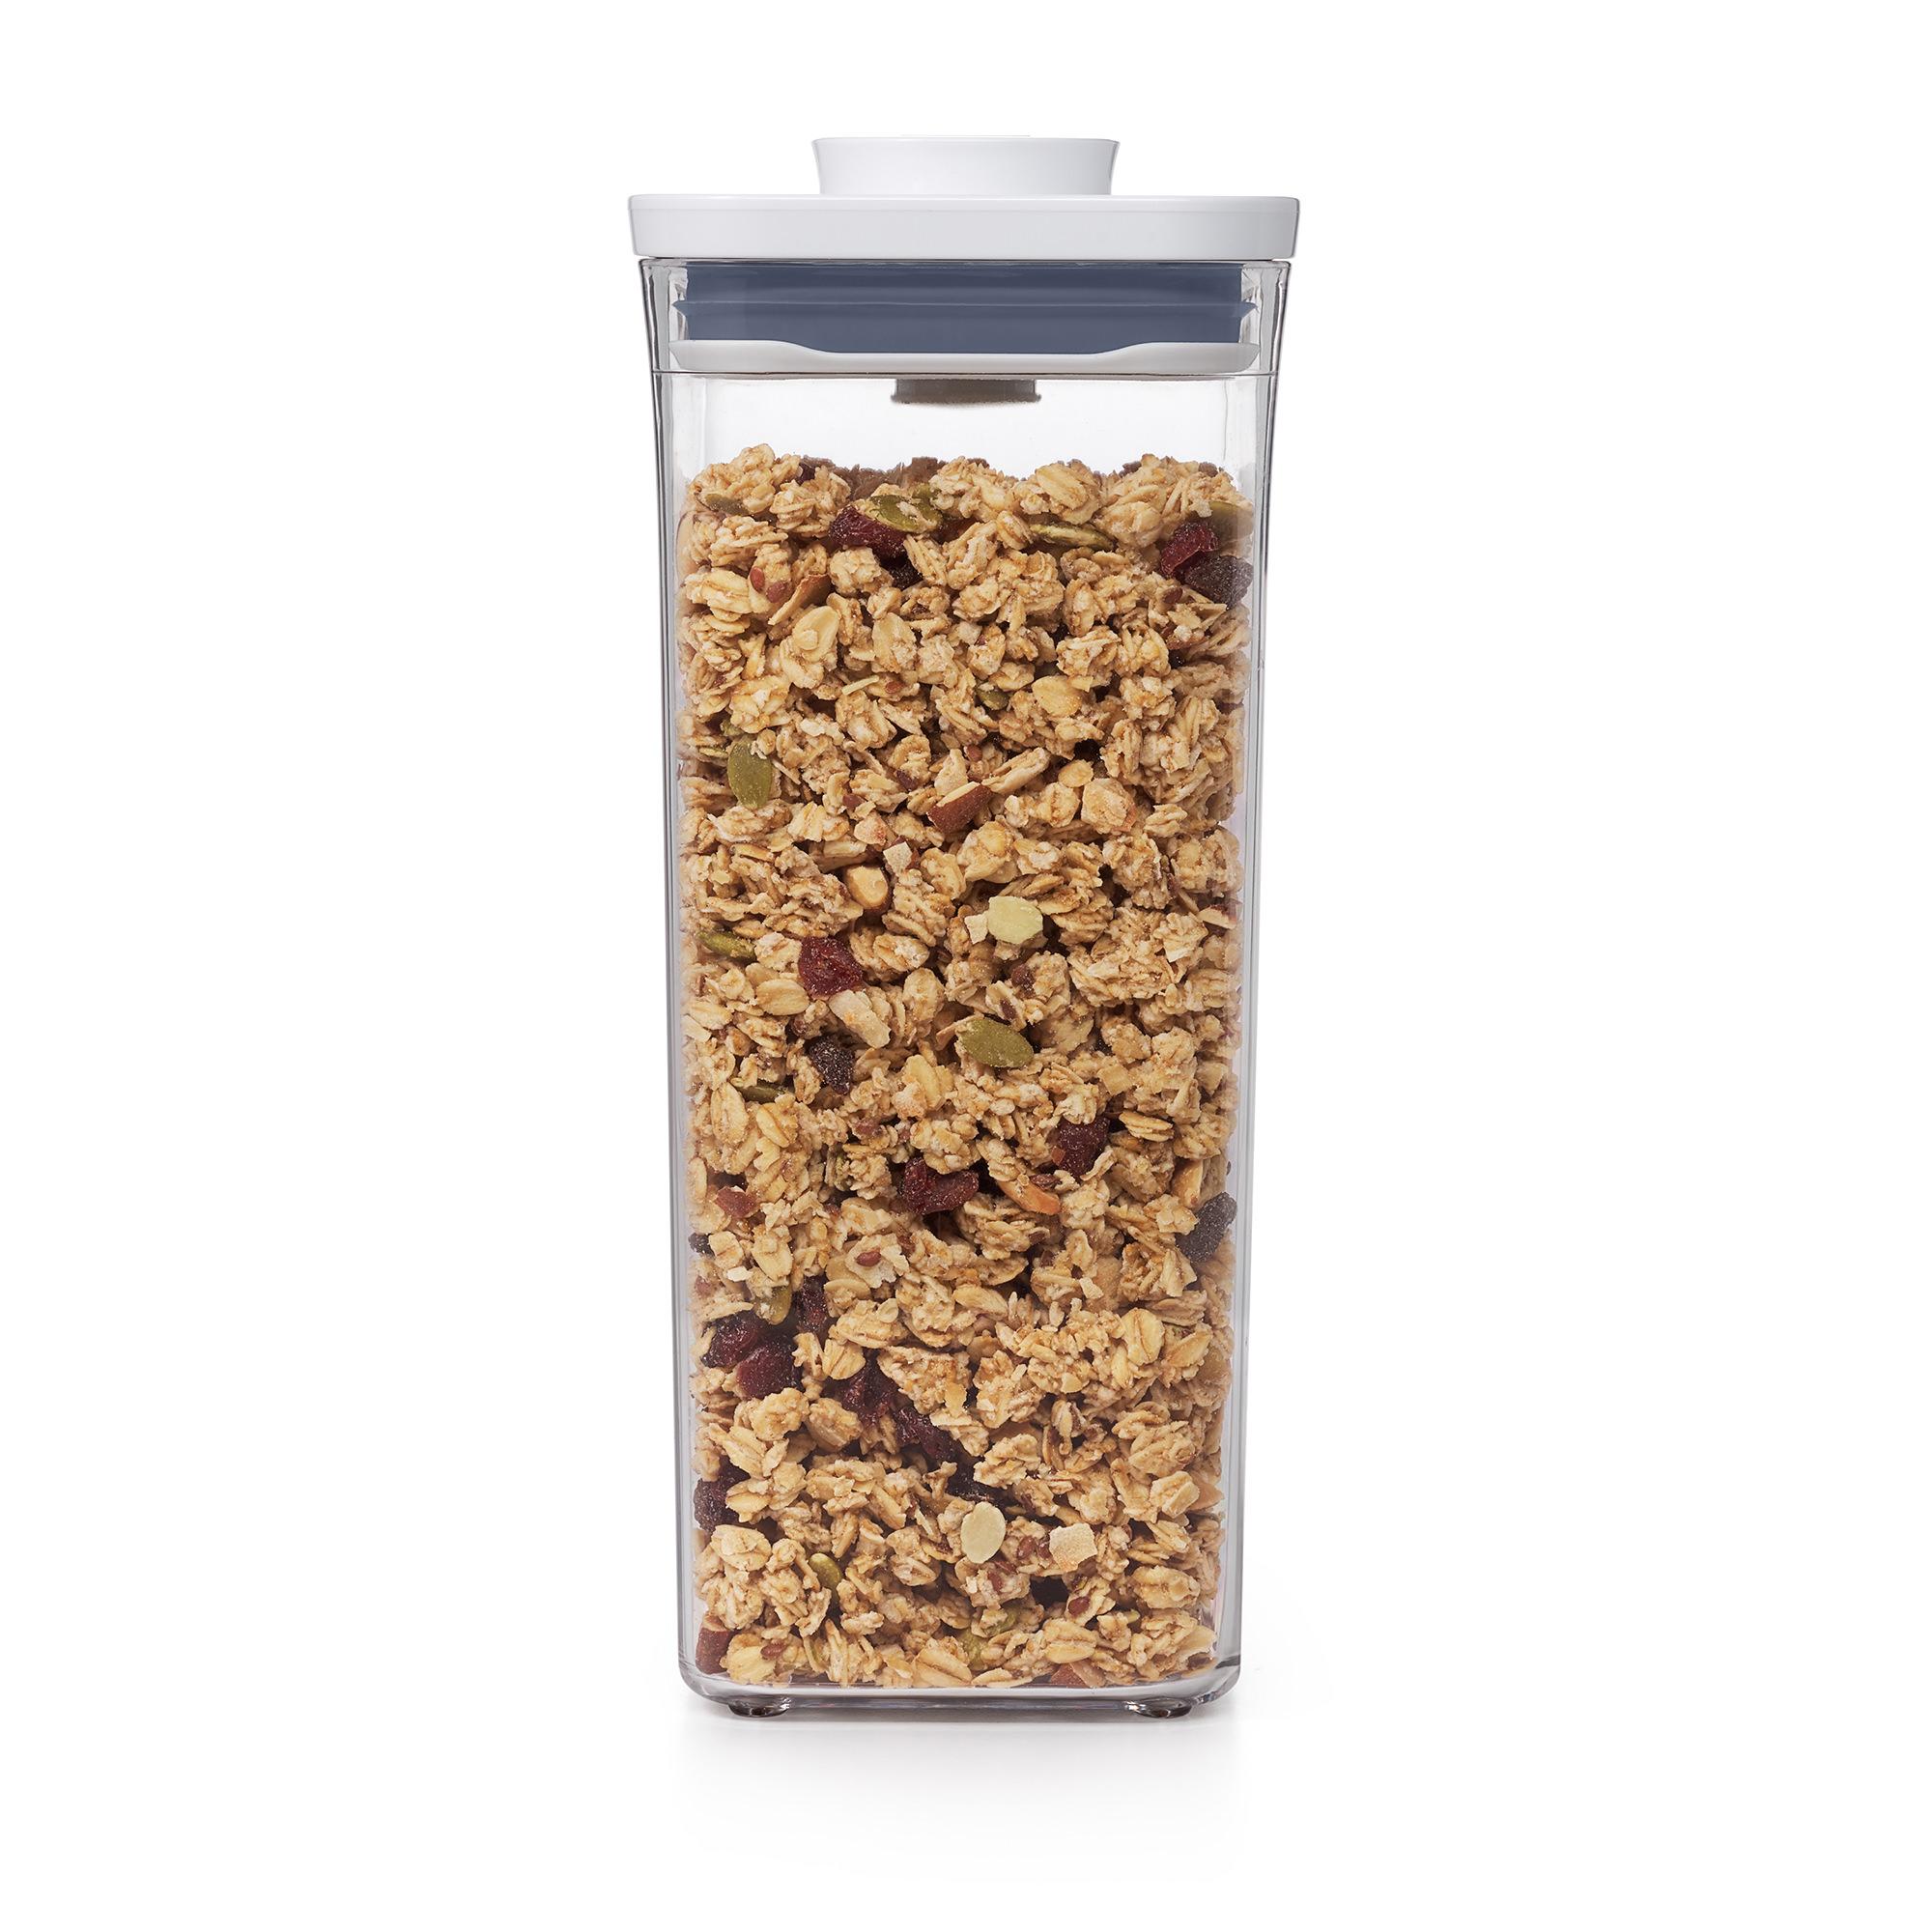 OXO Good Grips Square Pop 2.0 Container 1.6L Image 5